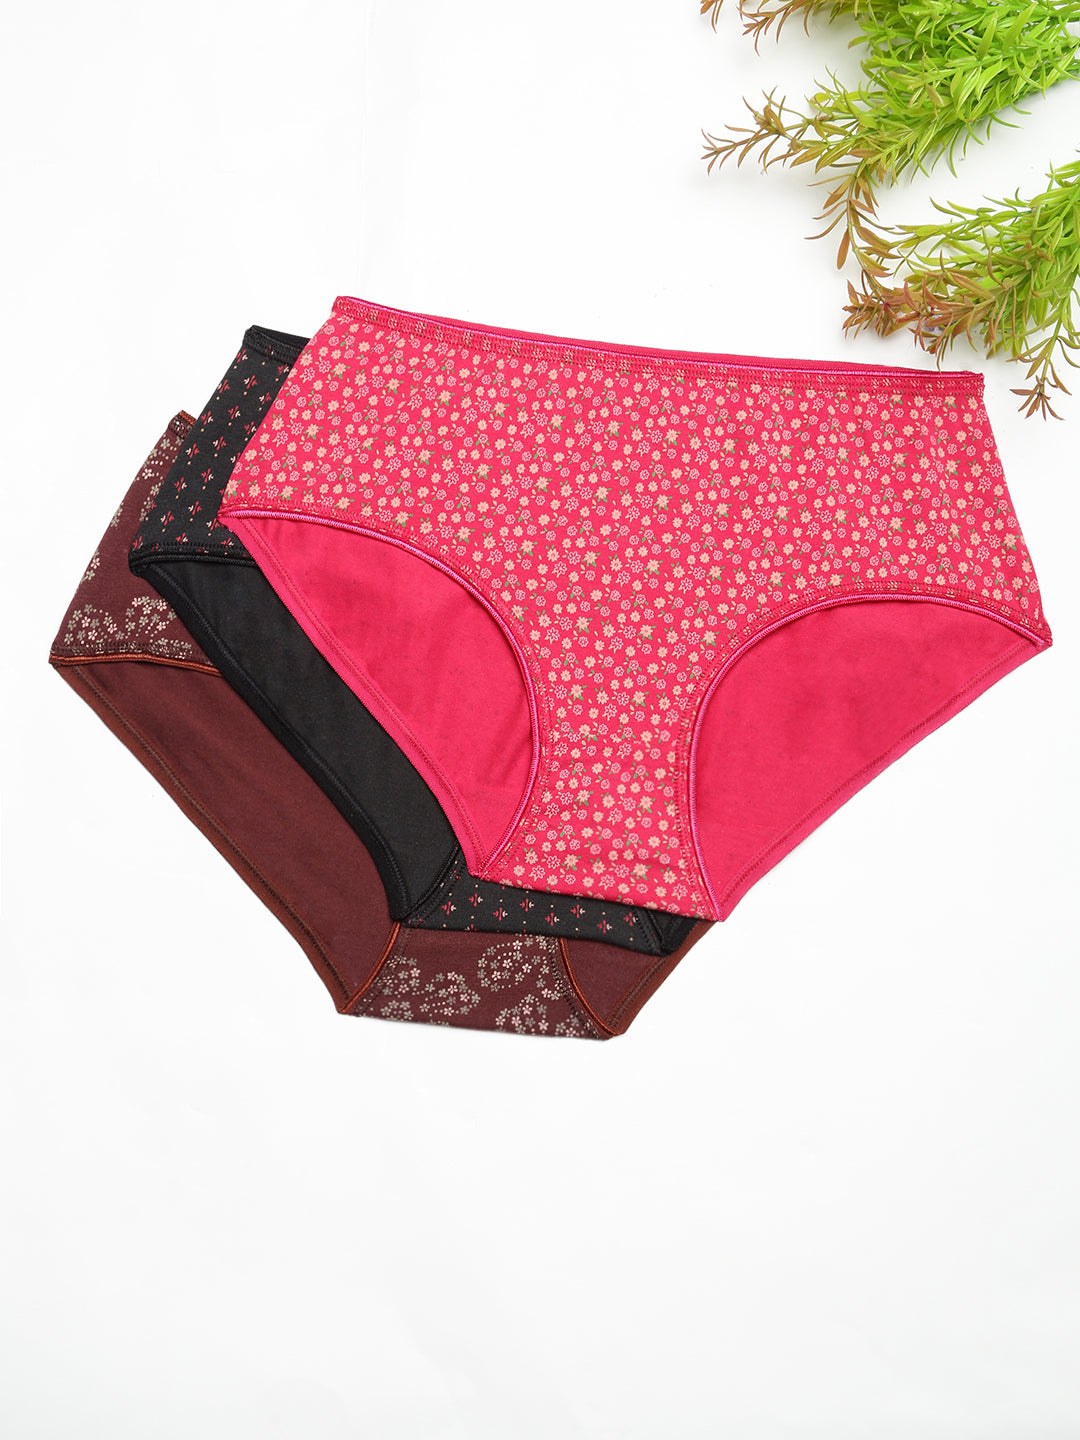 Get the Best Prisma High Waist Panty Combo with OE-Outer Elastic